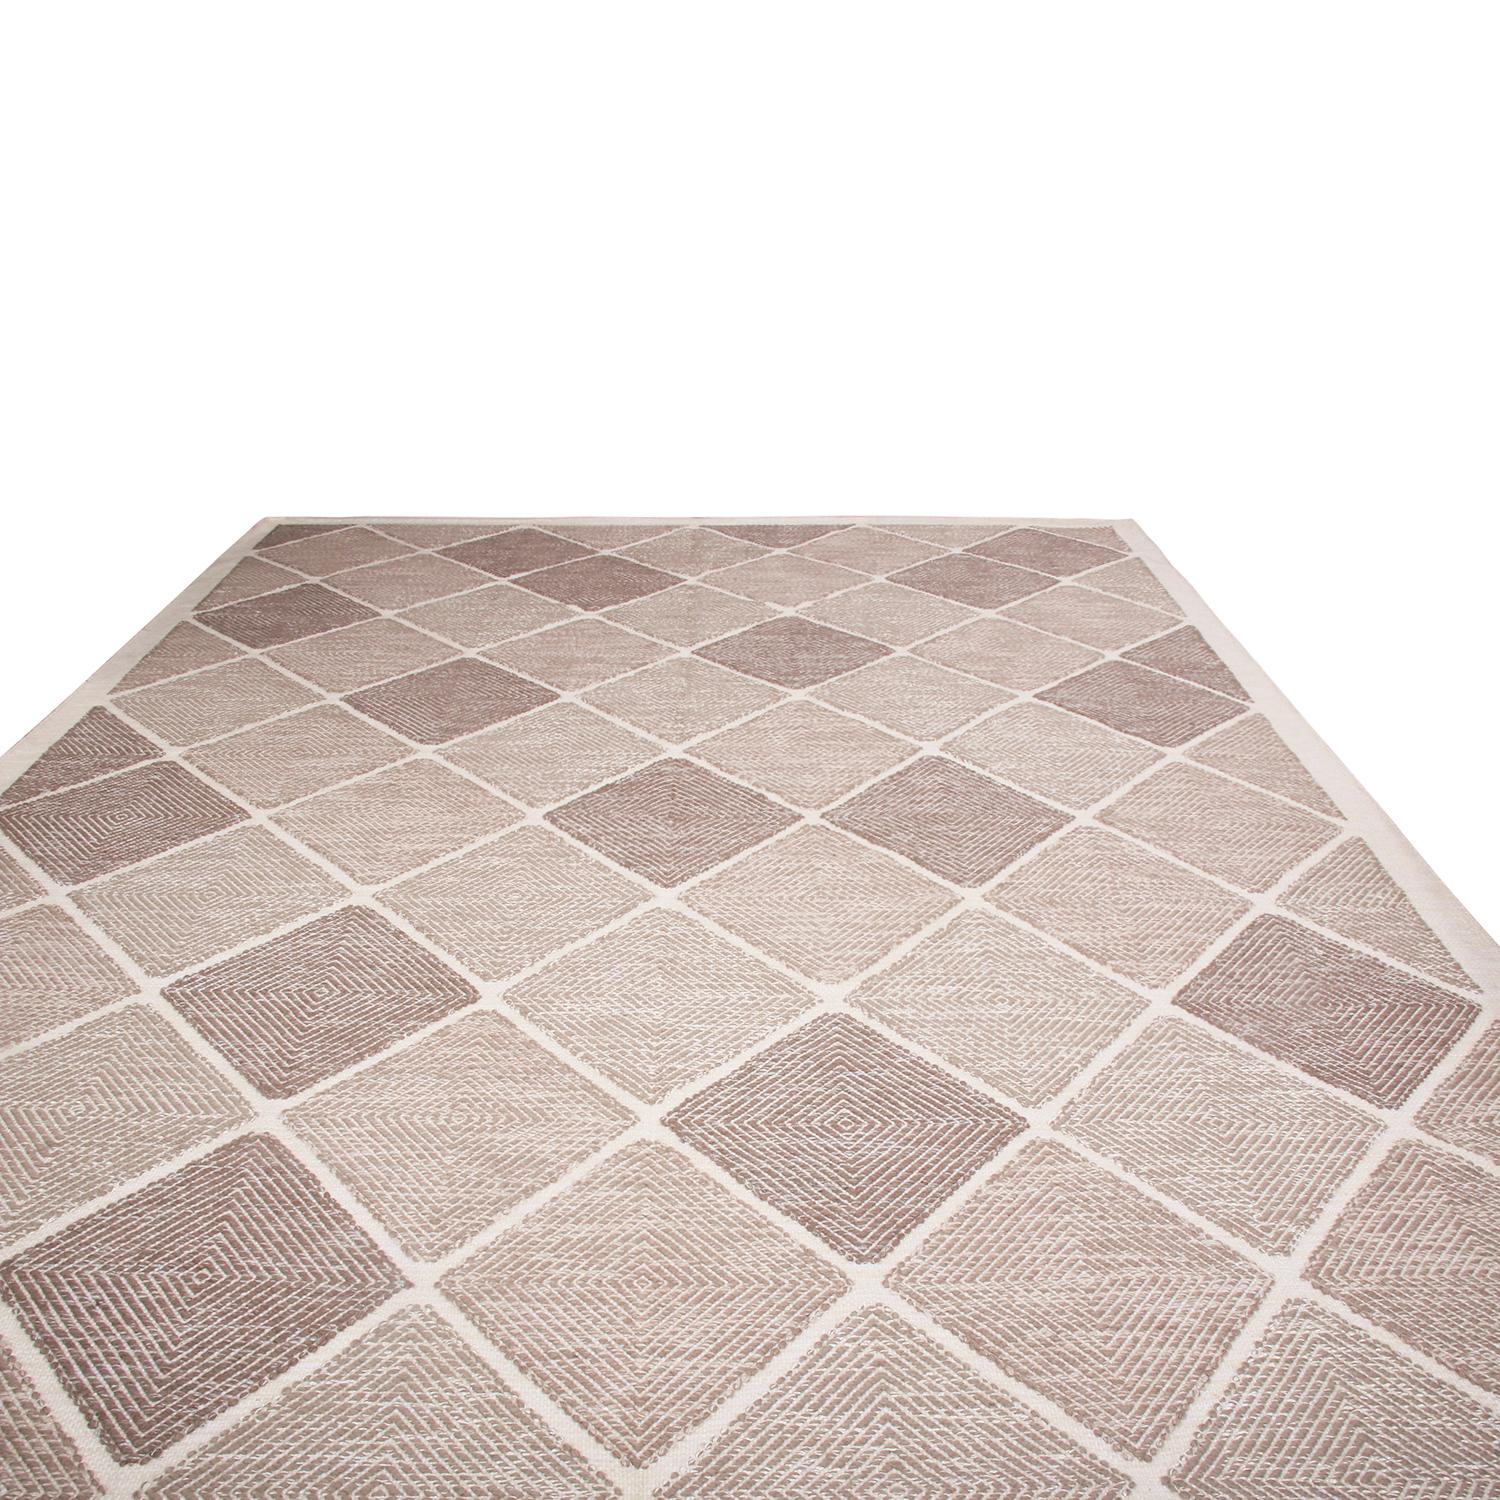 Rug & Kilim’s handwoven Swedish style rug hails from the latest wool flat-weave additions to the Scandinavian collection, offering our unique, refined large-scale approach to the geometry and vintage colorways like that of their midcentury